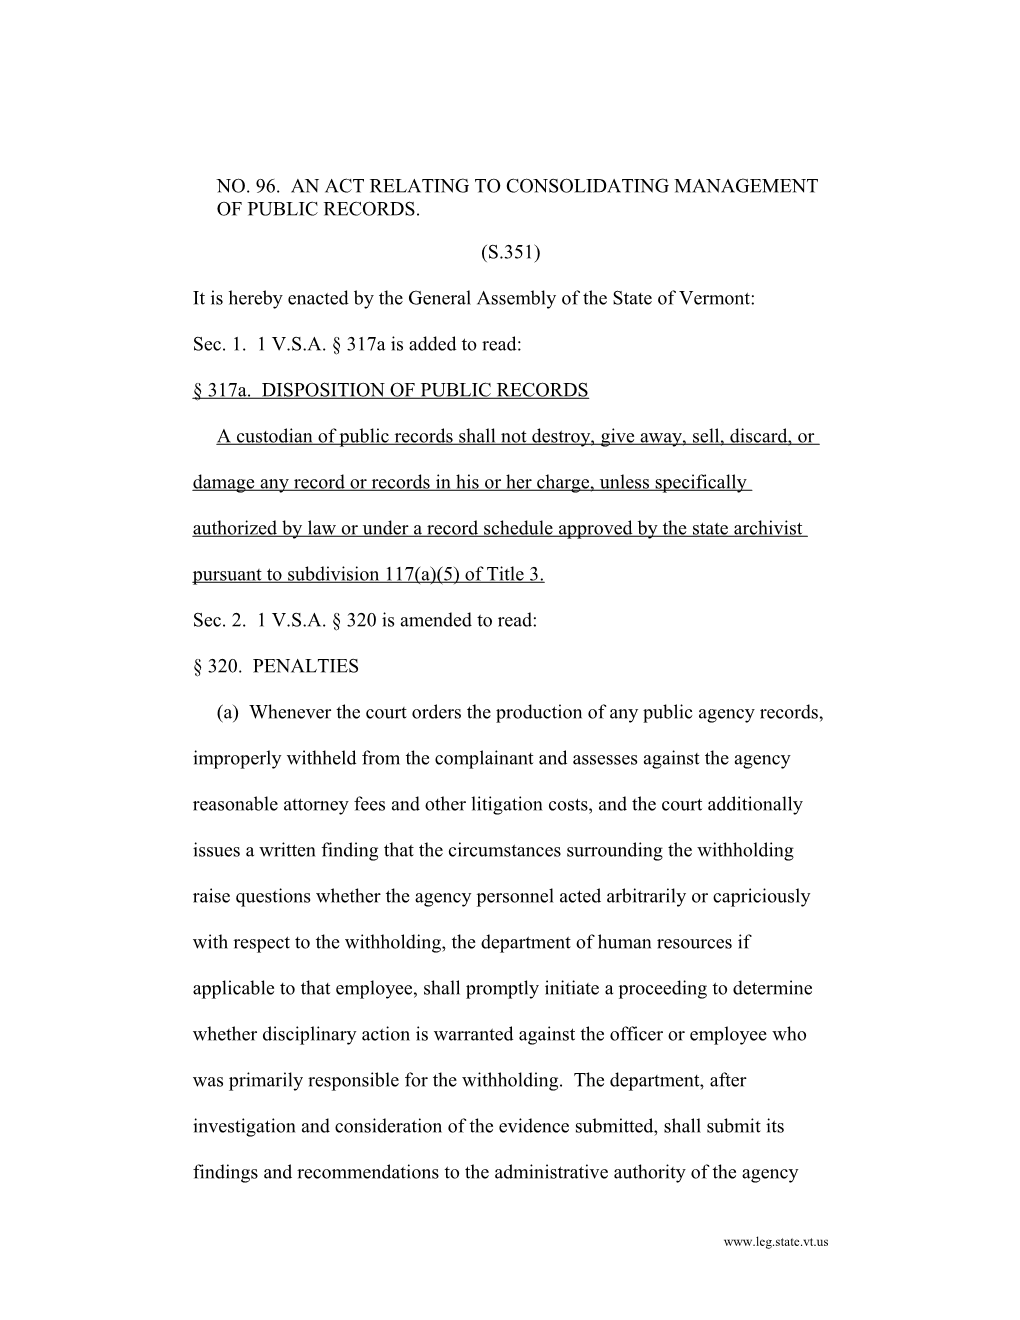 No. 96. an Act Relating to Consolidating Management of Public Records